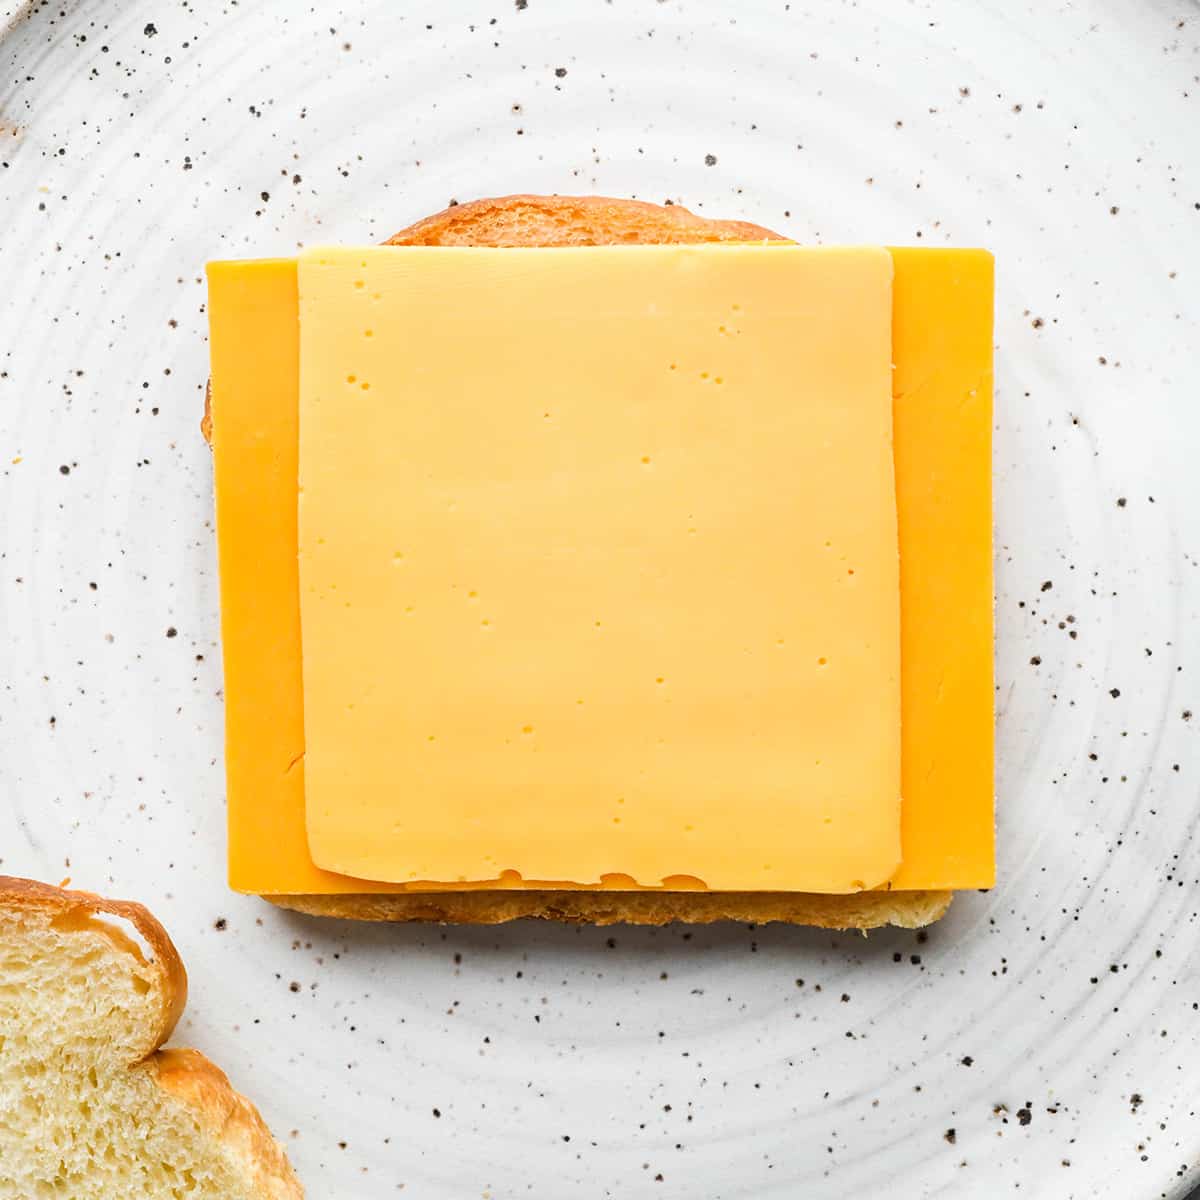 How to Make a Grilled Cheese Sandwich - putting cheese on the bread